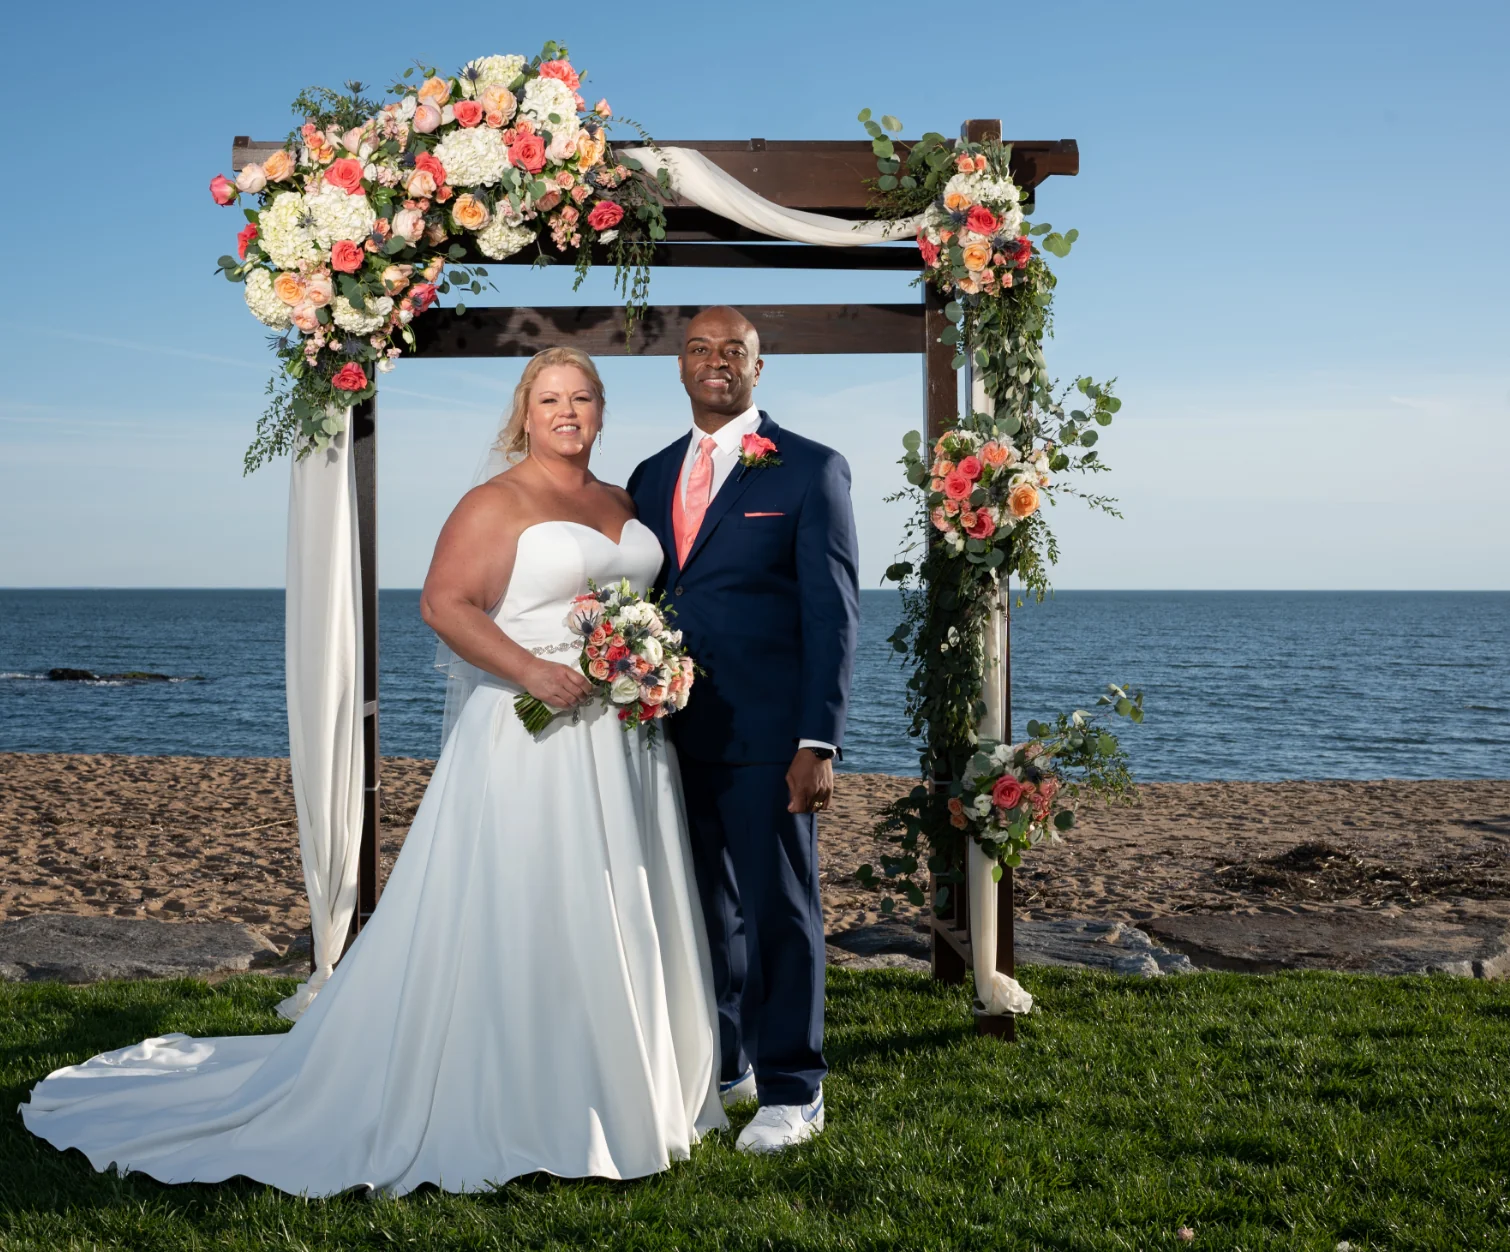 Married couple posing in front of an arch near the water